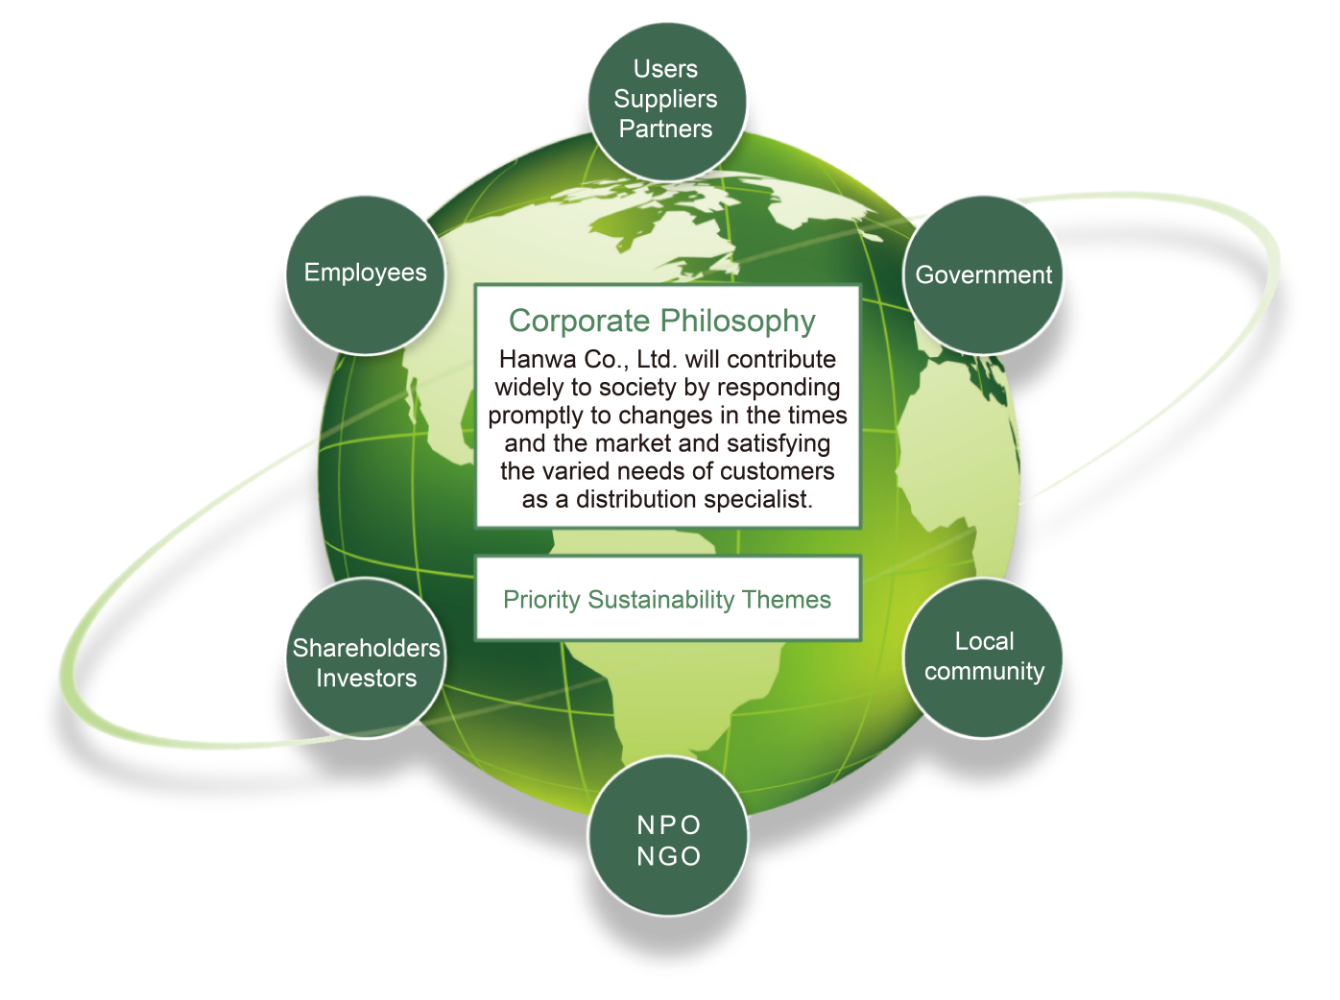 Priority Sustainability Themes